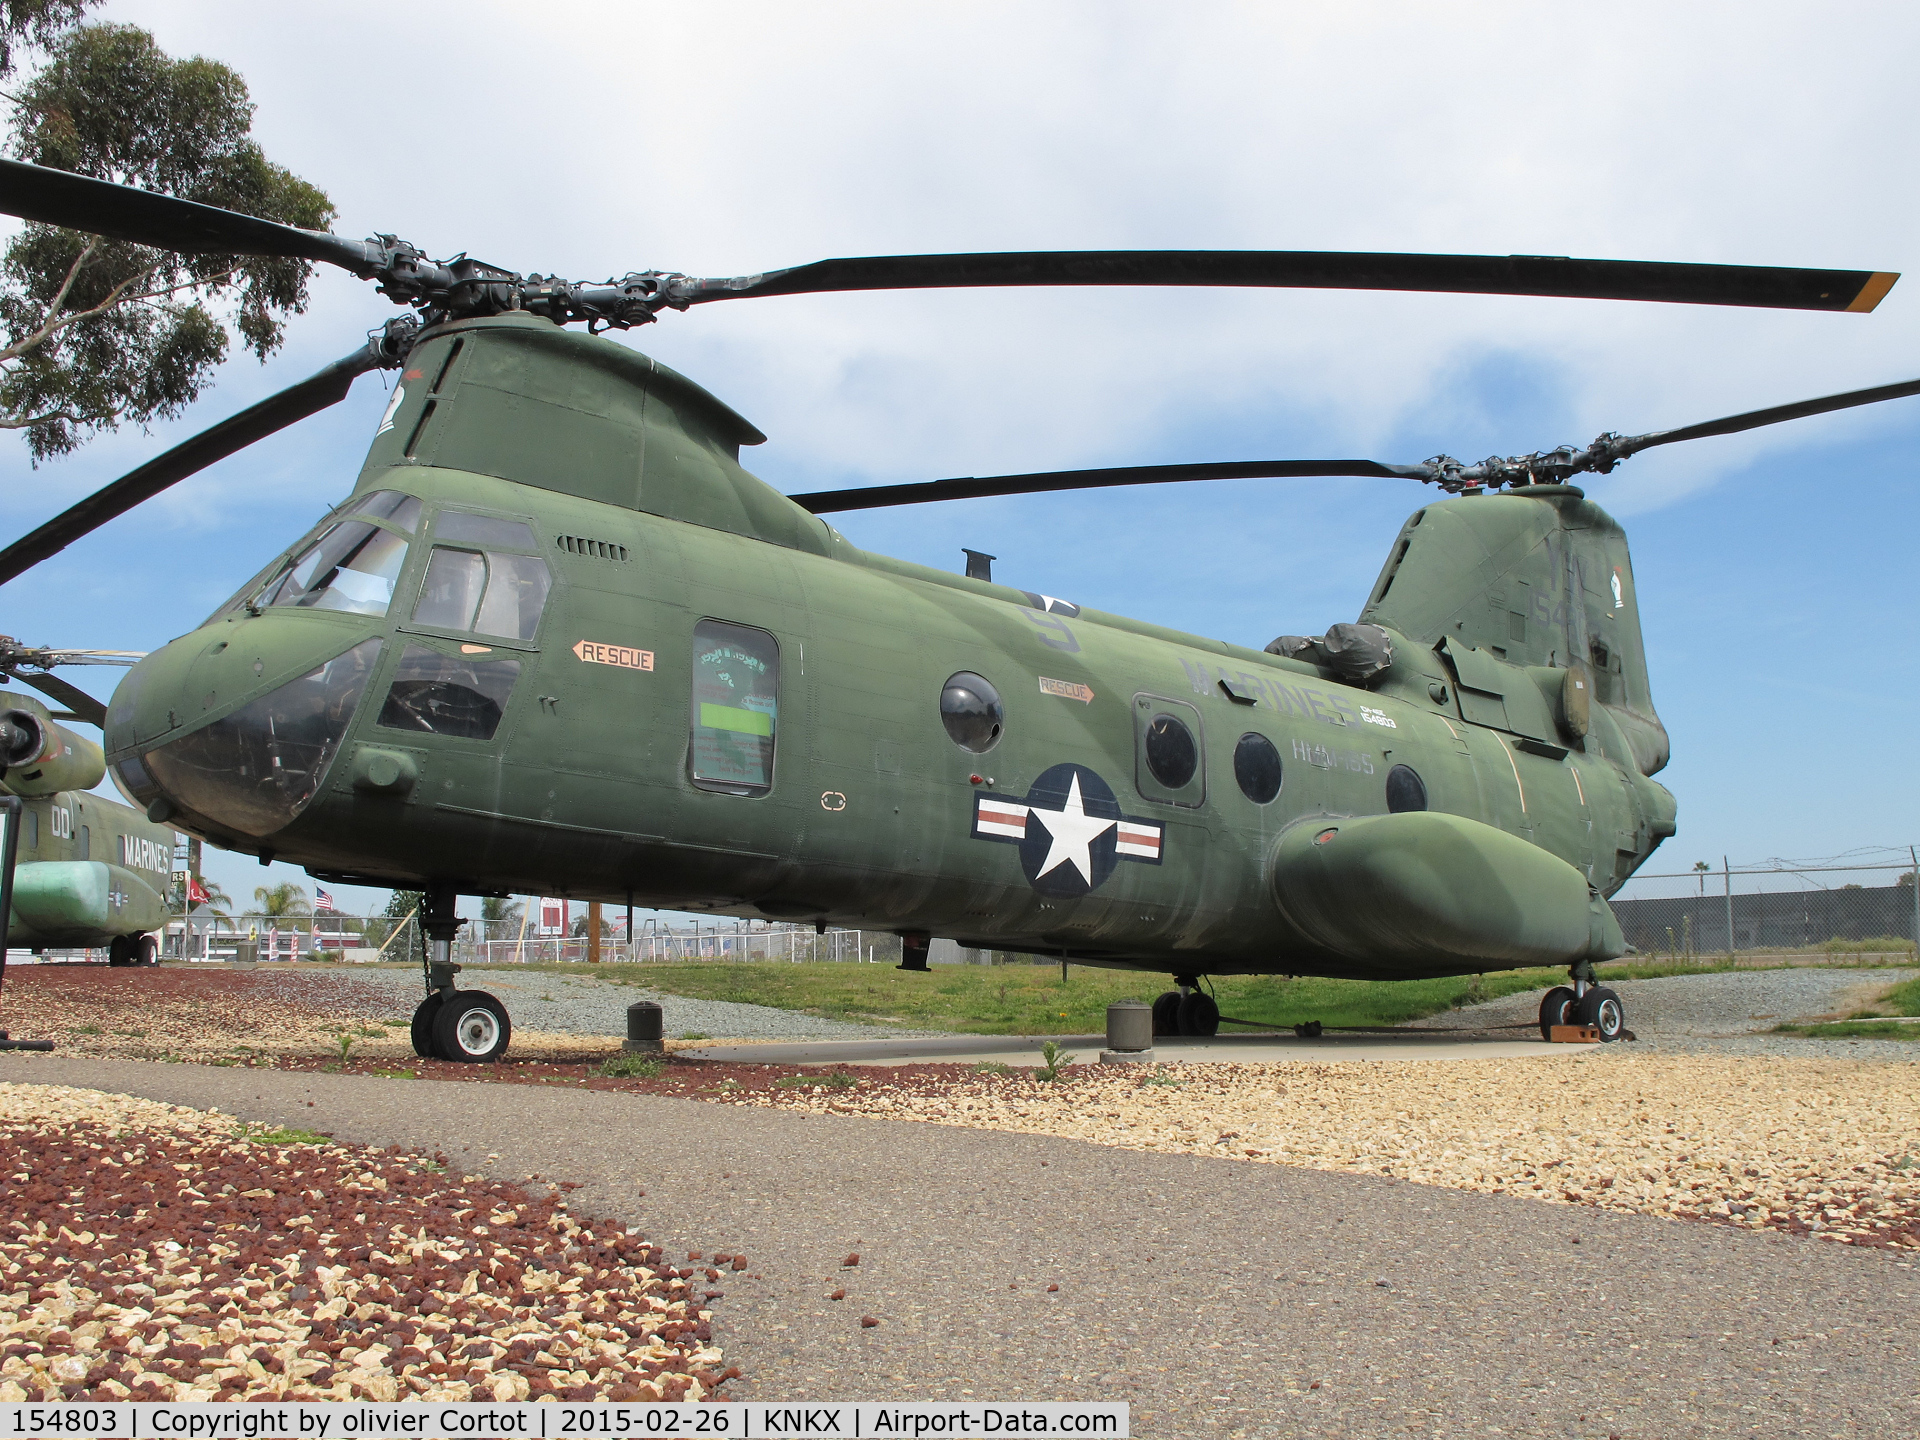 154803, Boeing Vertol CH-46D Sea Knight C/N 2410, the workhorse of the marine corps